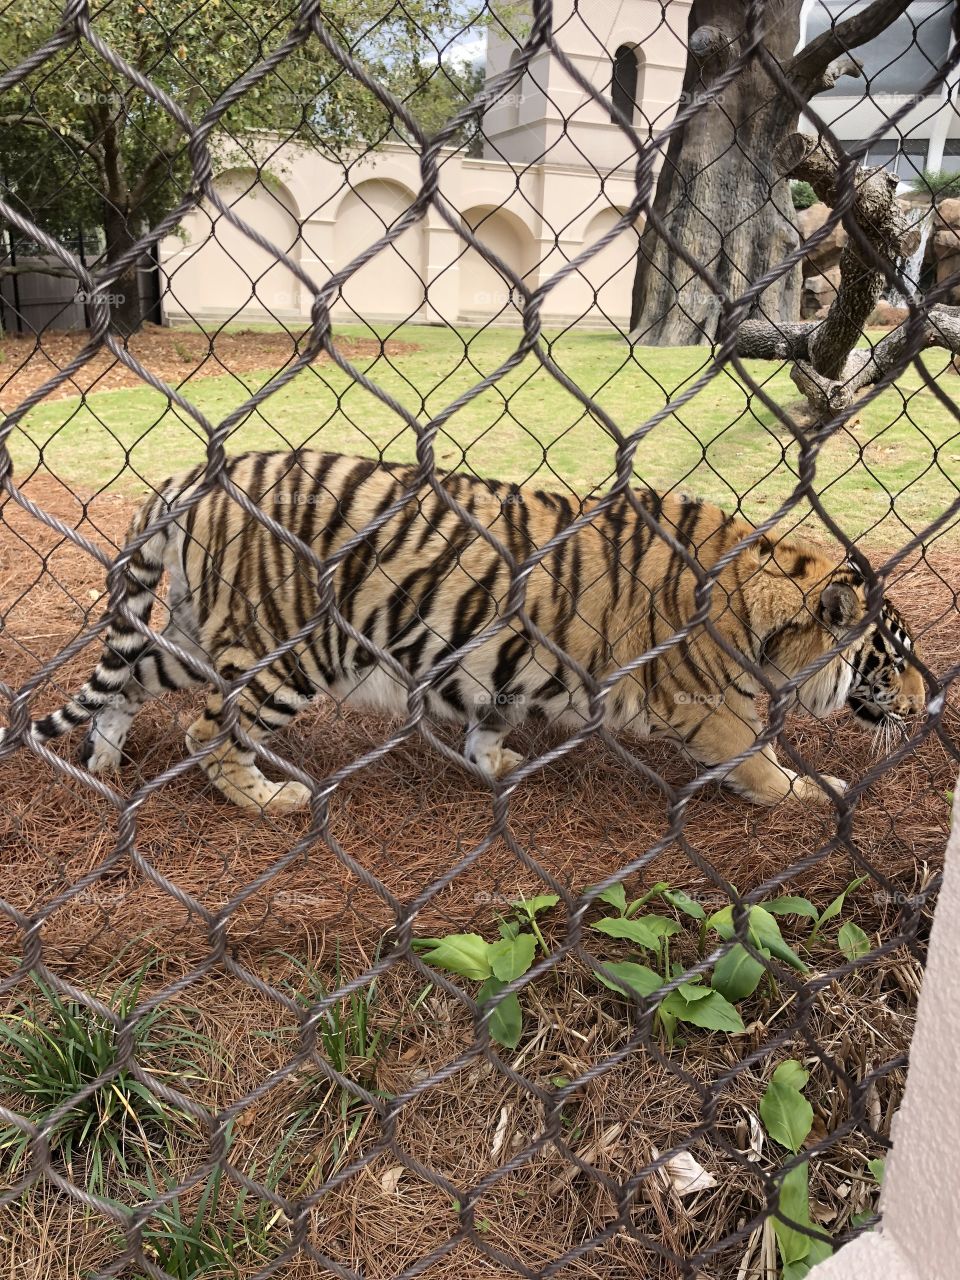 Mike the tiger - LSU mascot